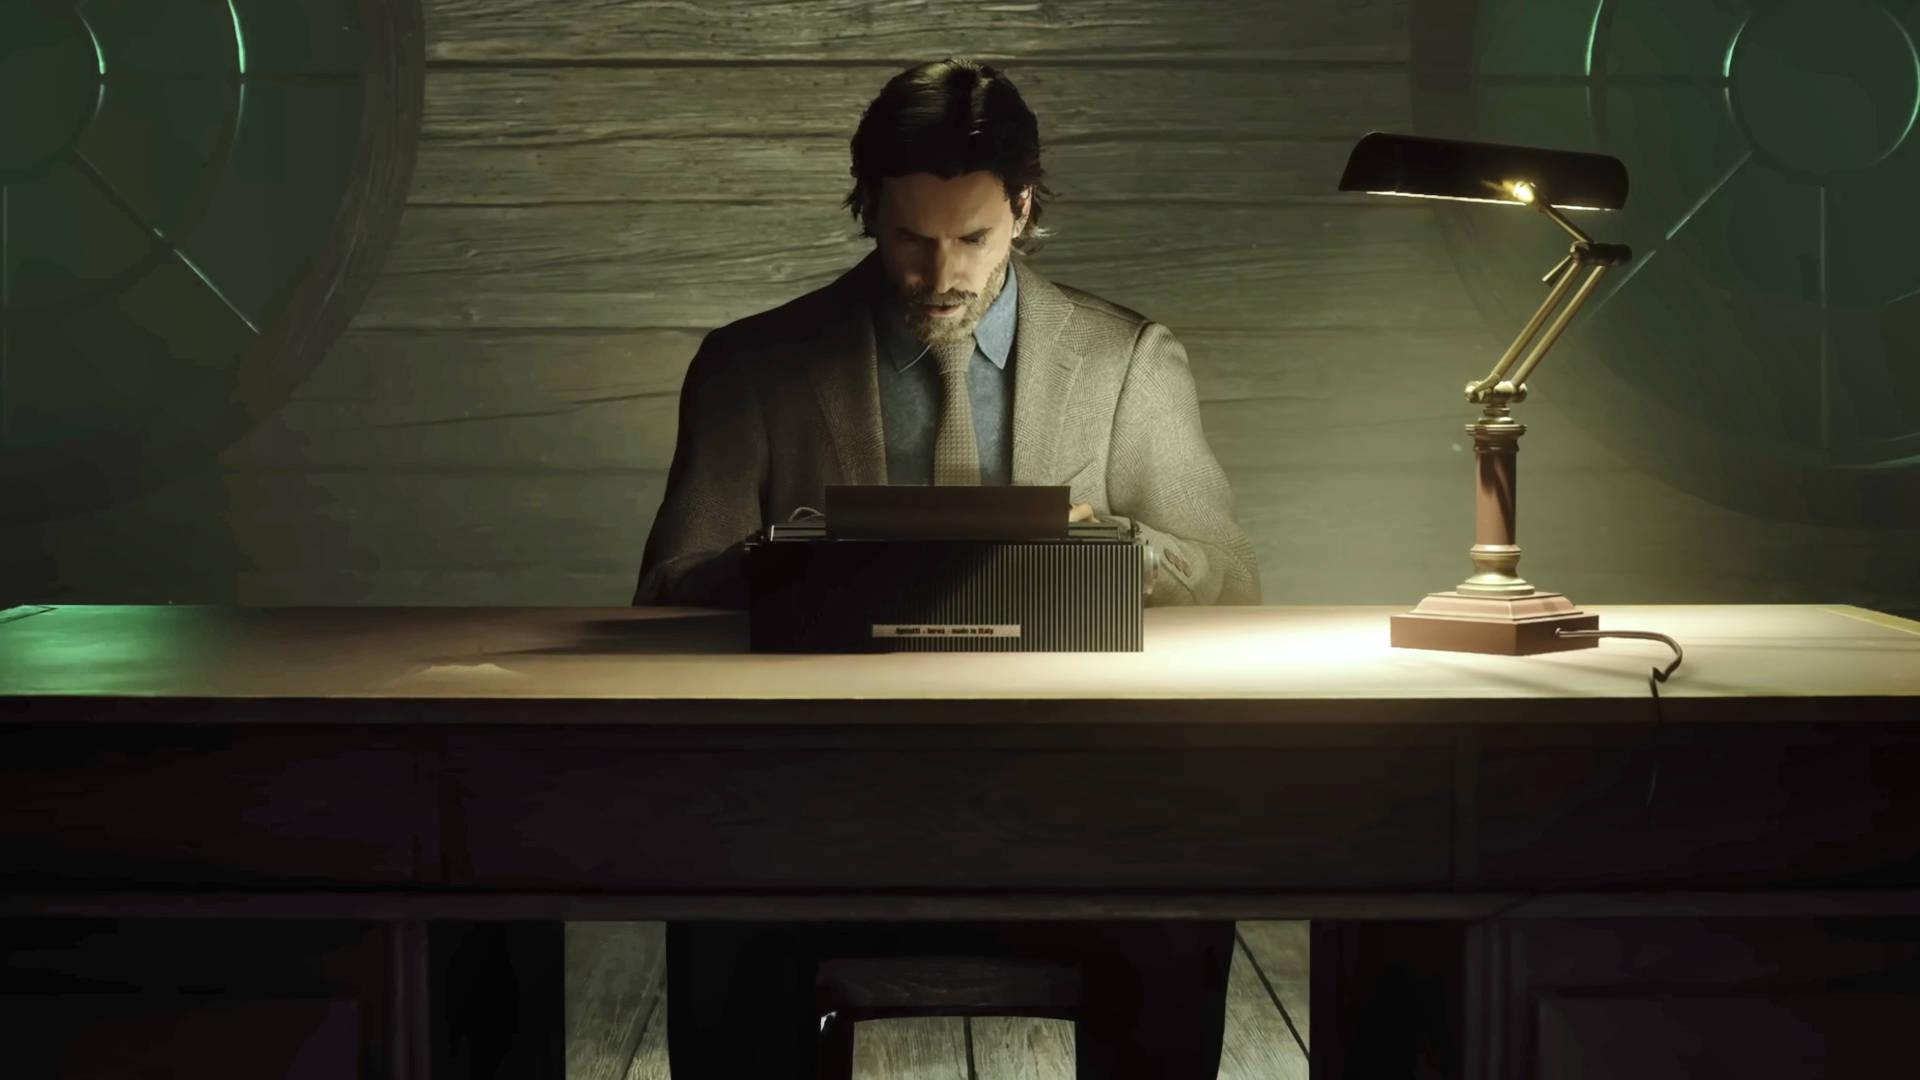 alan-wake-2-release-date-trailers-story-and-gameplay